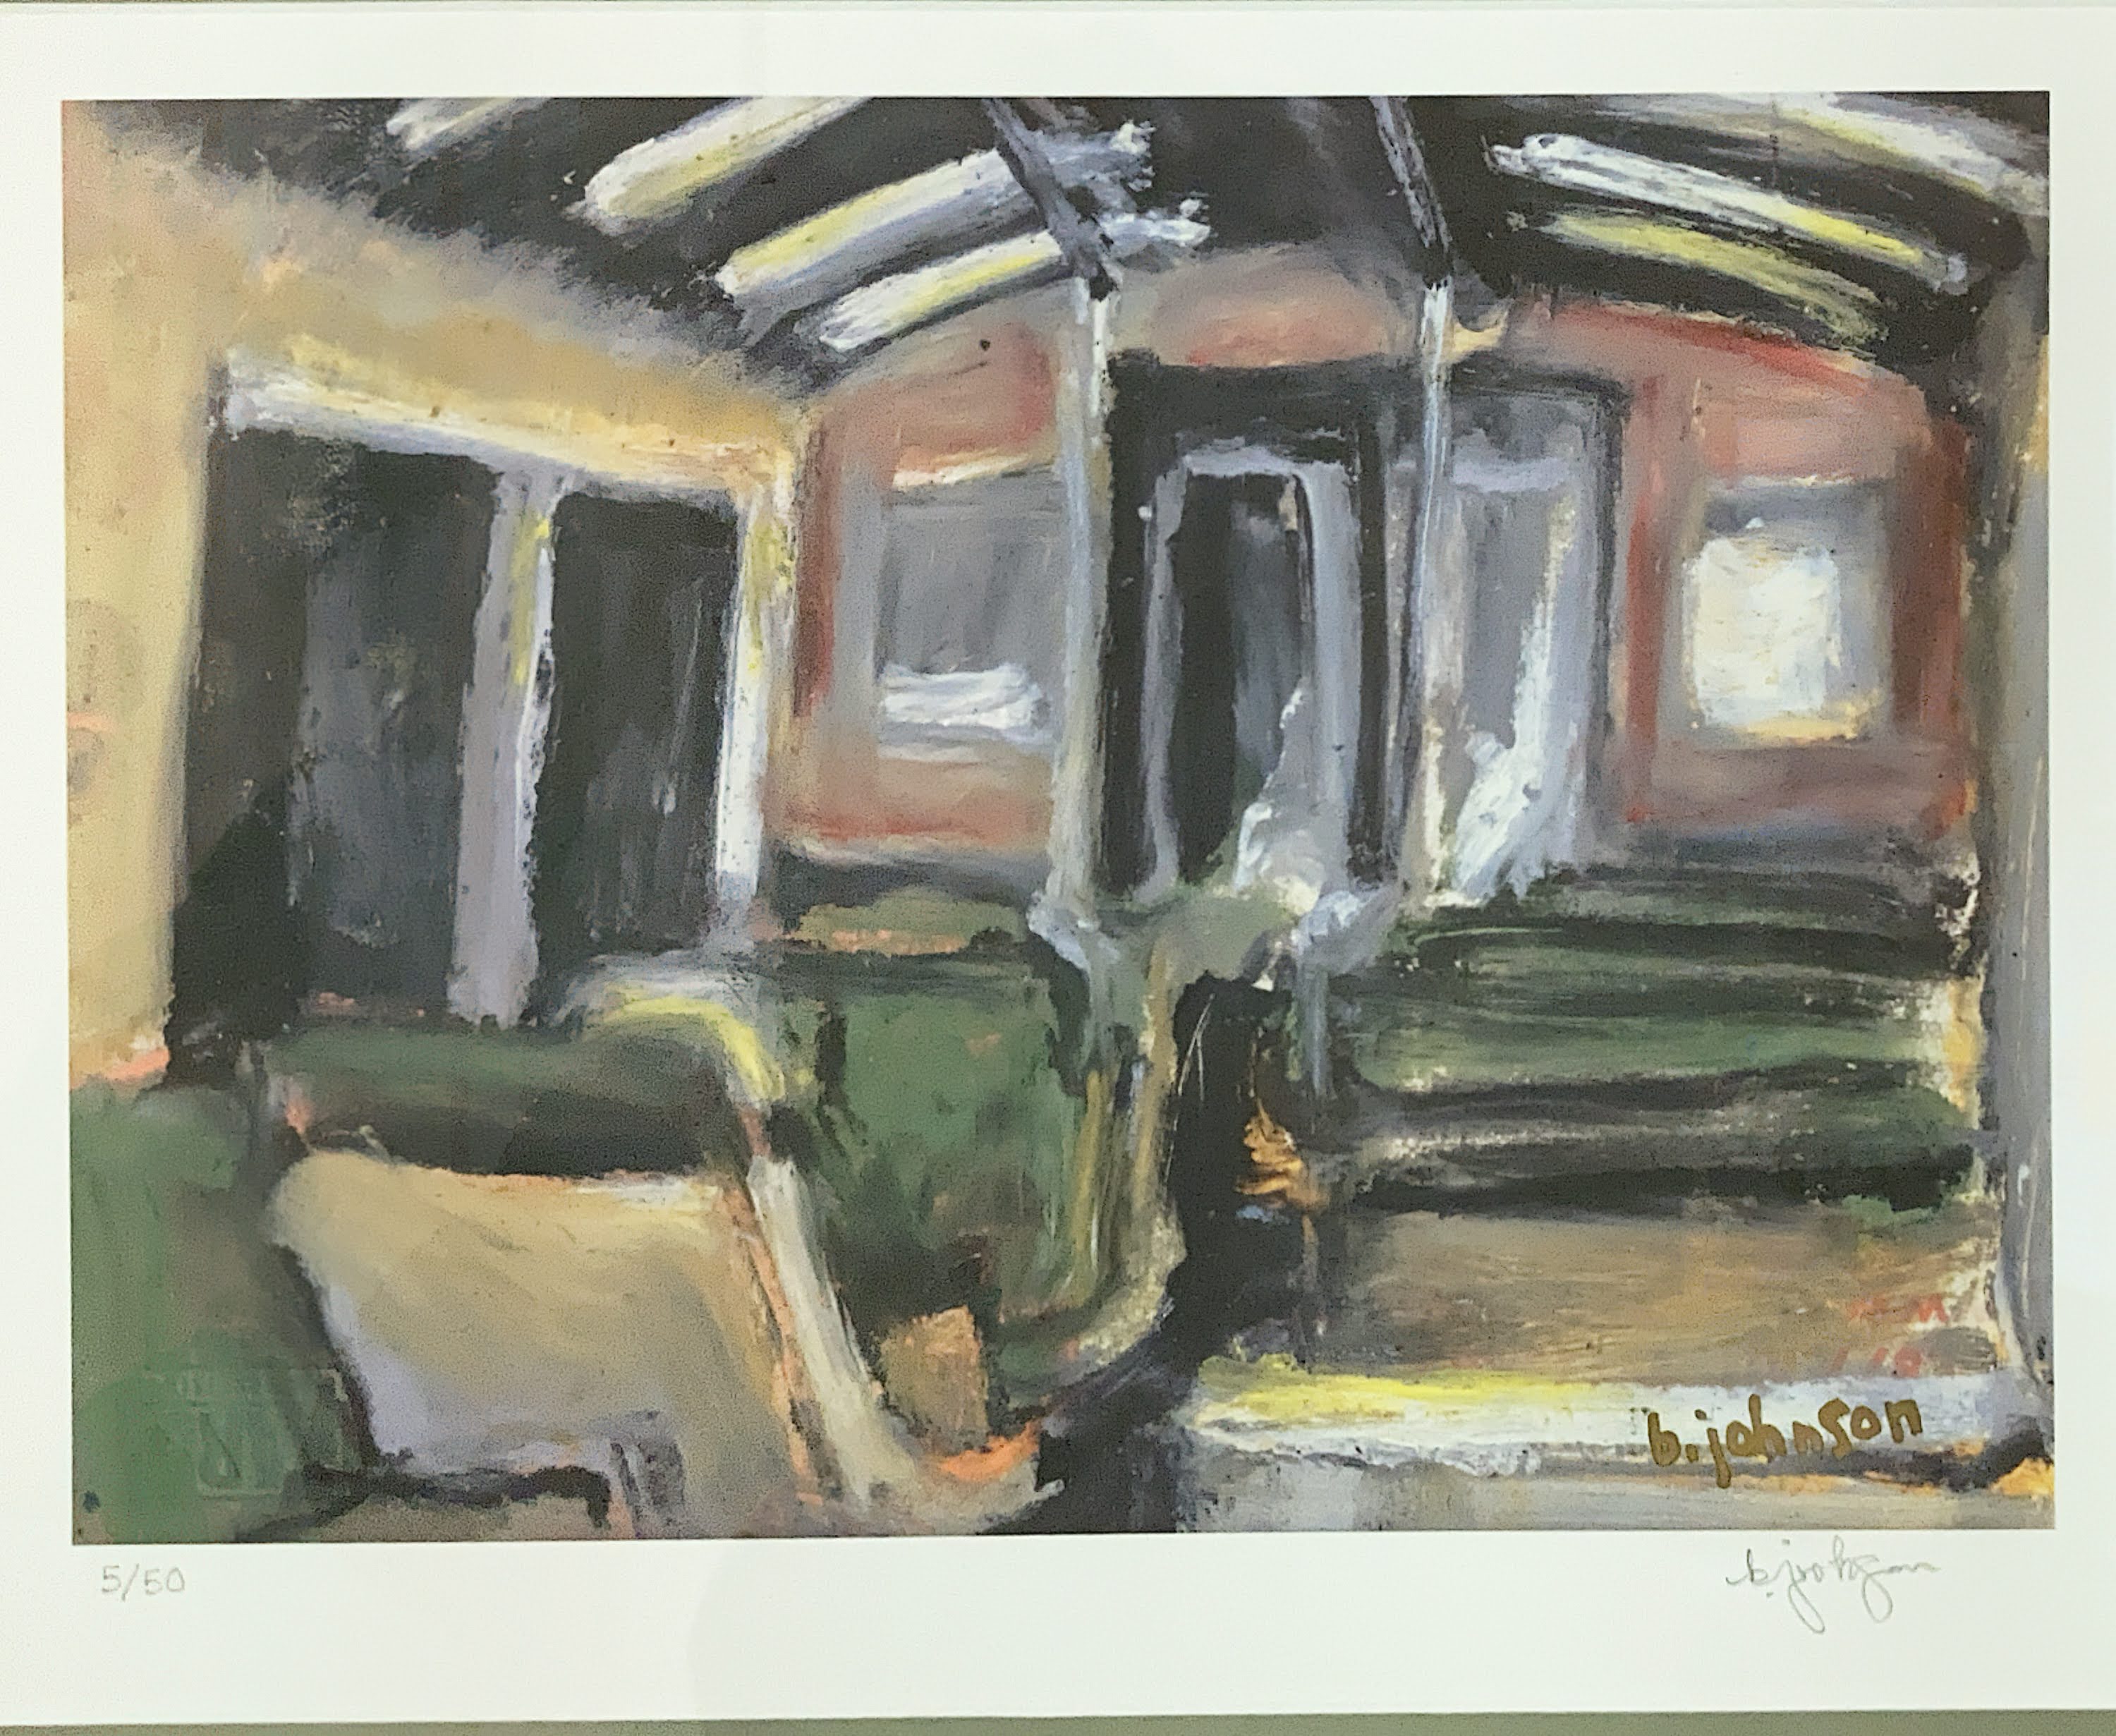 An oil painting of a BART train car gifted to Gene and Stefani